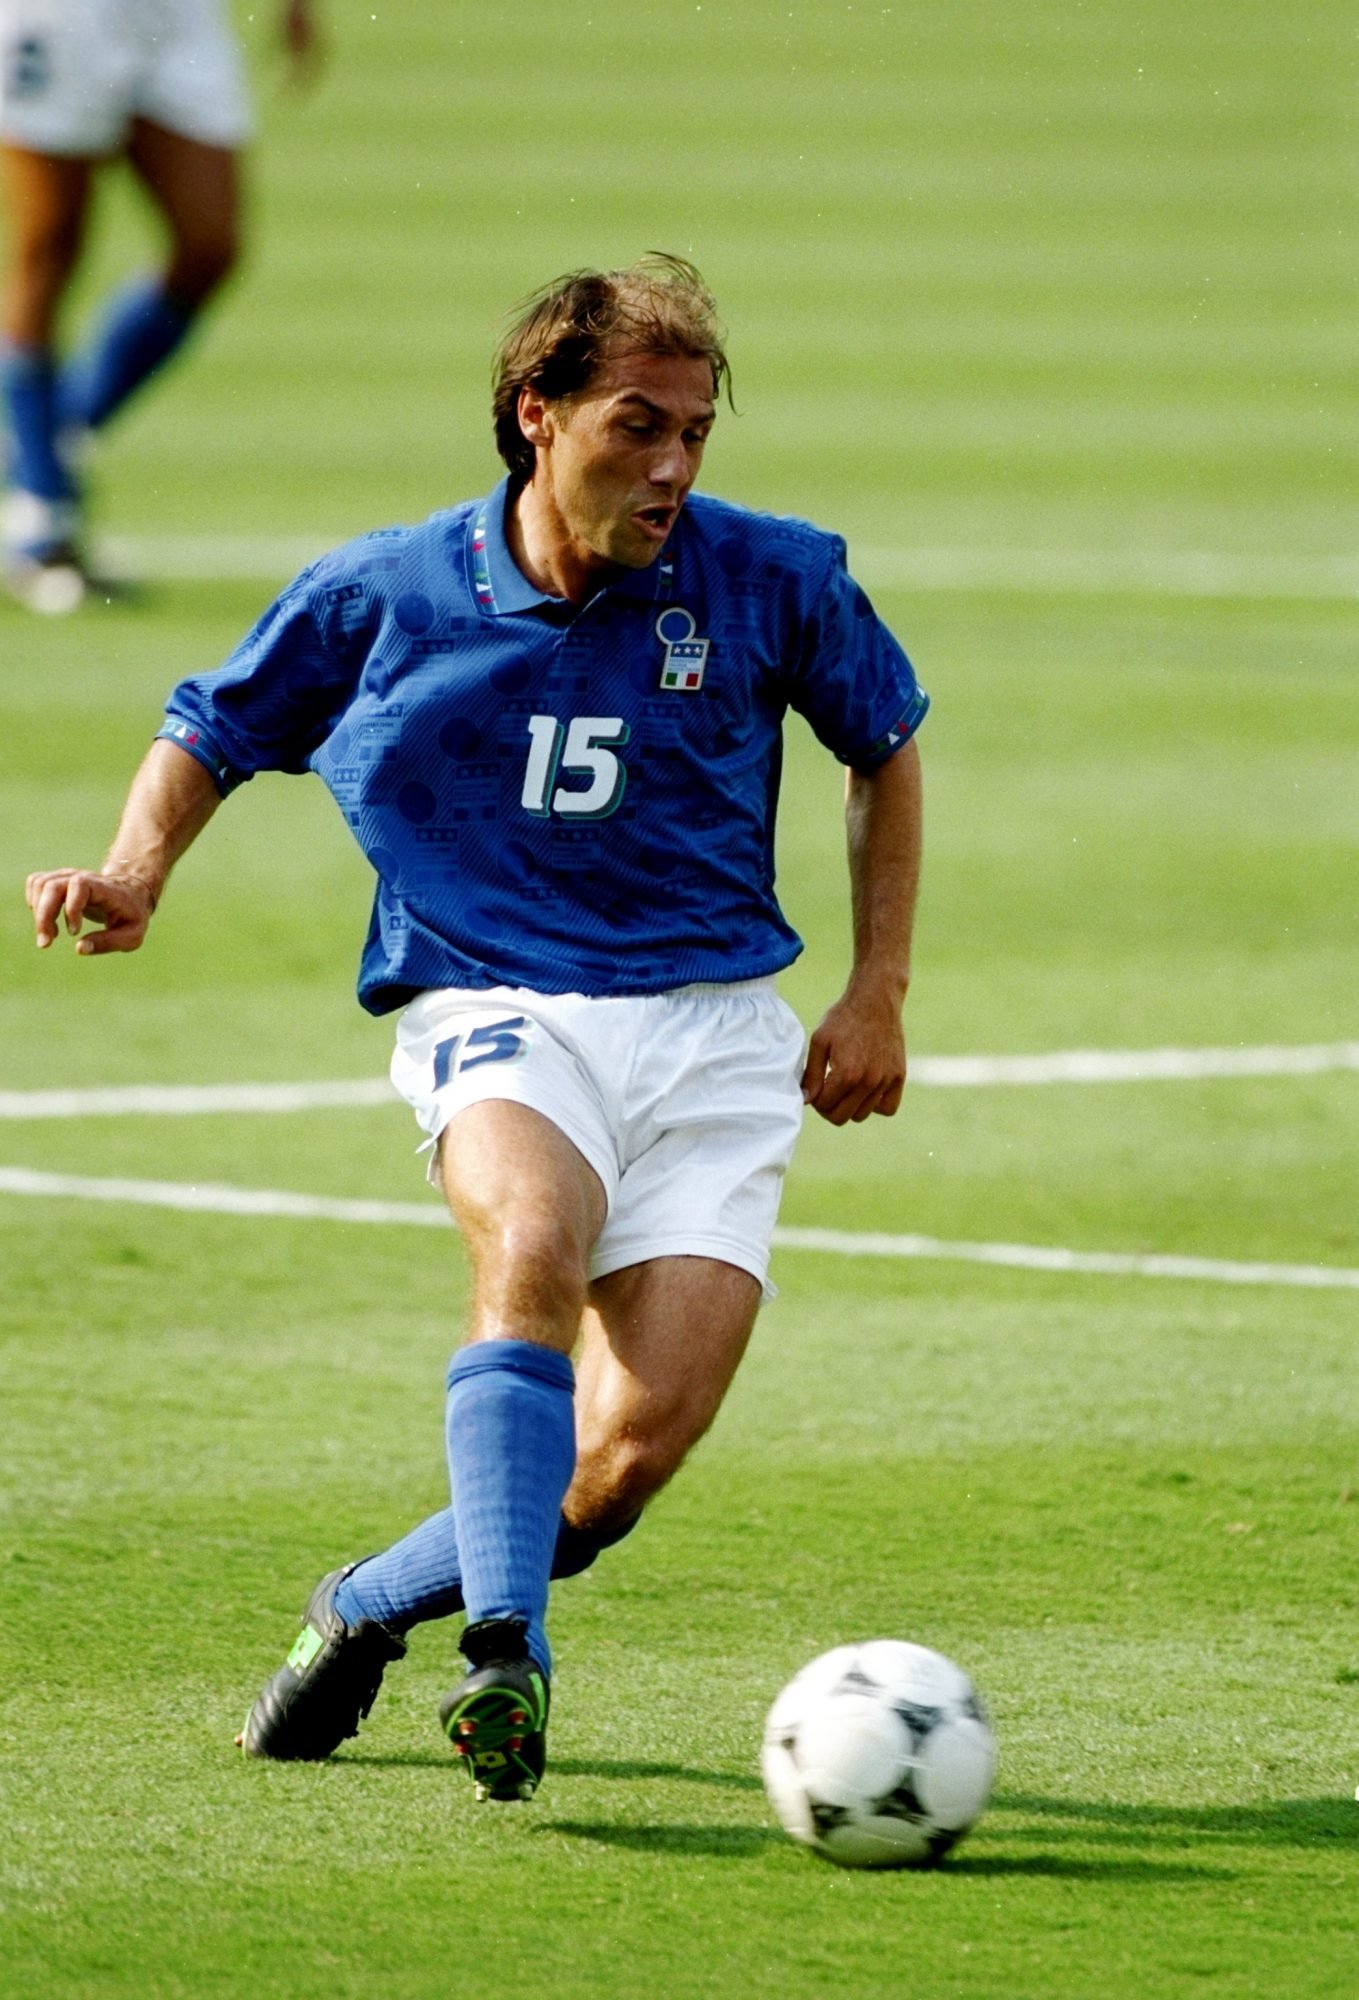 13 Jul 1994: Antonio Conte of Italy in action during the World Cup semi-final against Bulgaria at the Giants Stadium in New York. Italy won the match 2-1. Mandatory Credit: Mike Hewitt/Allsport